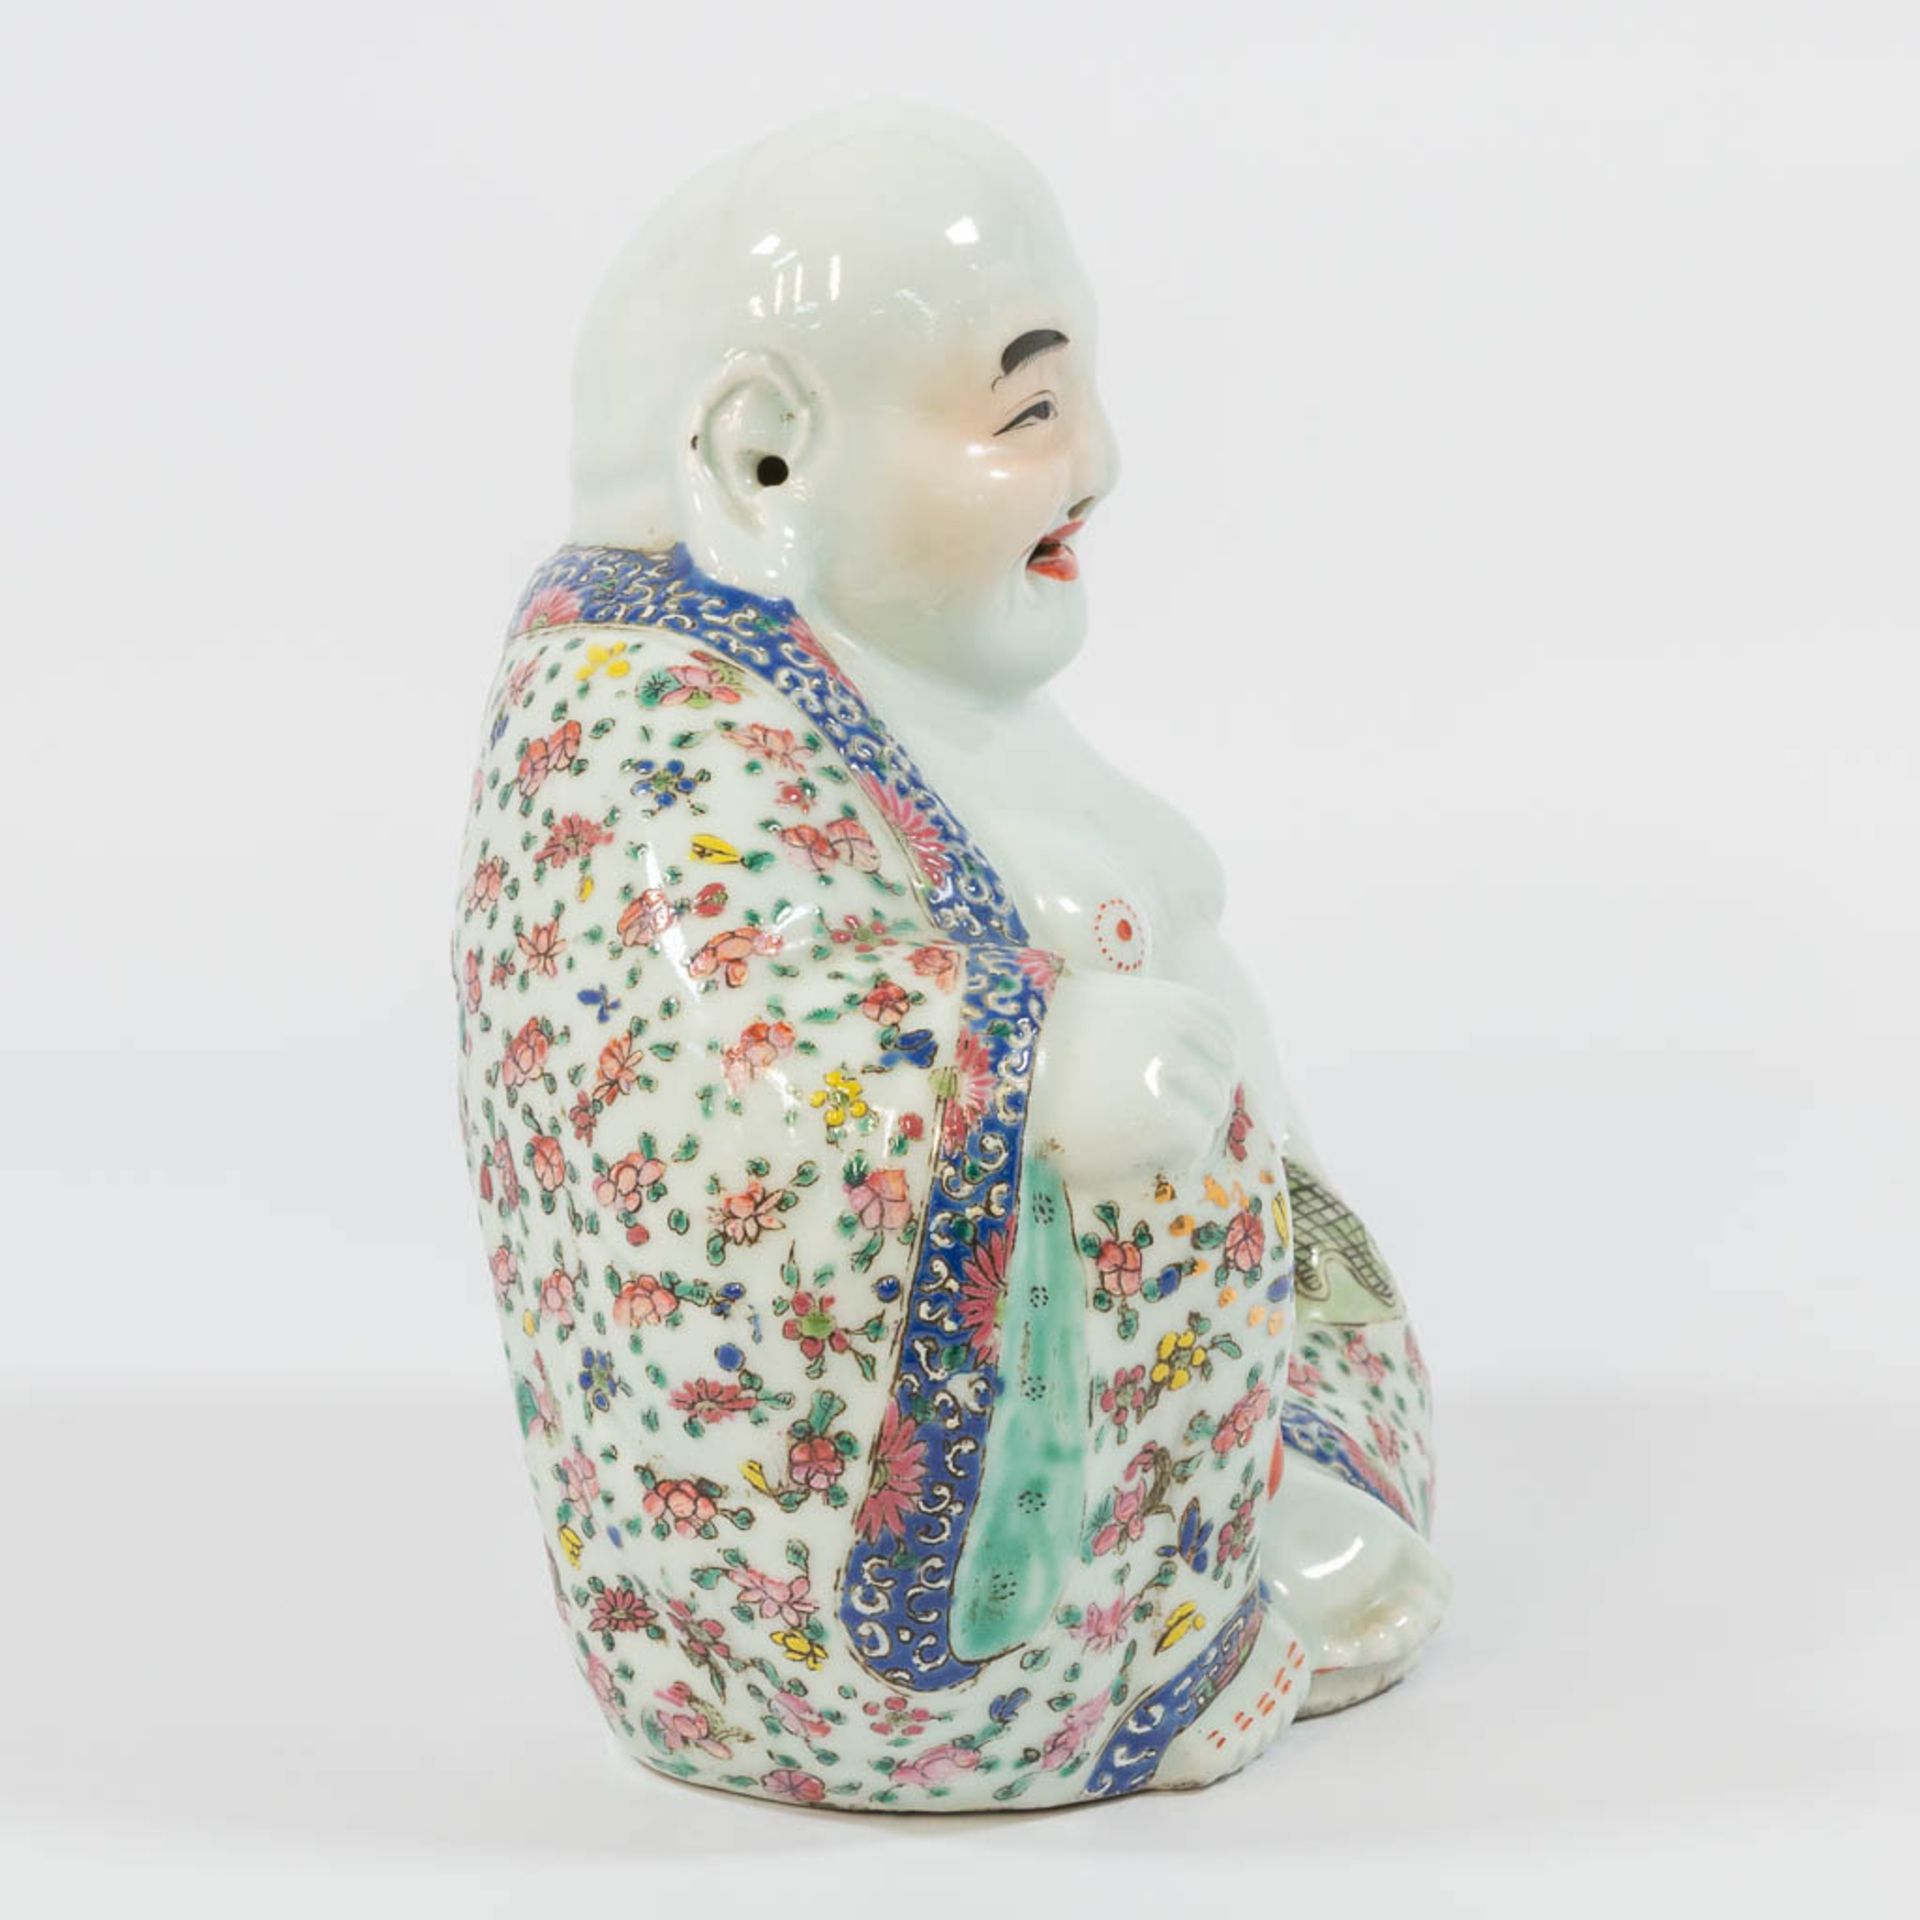 A Chinese laughing buddha, made of porcelain. - Image 6 of 27